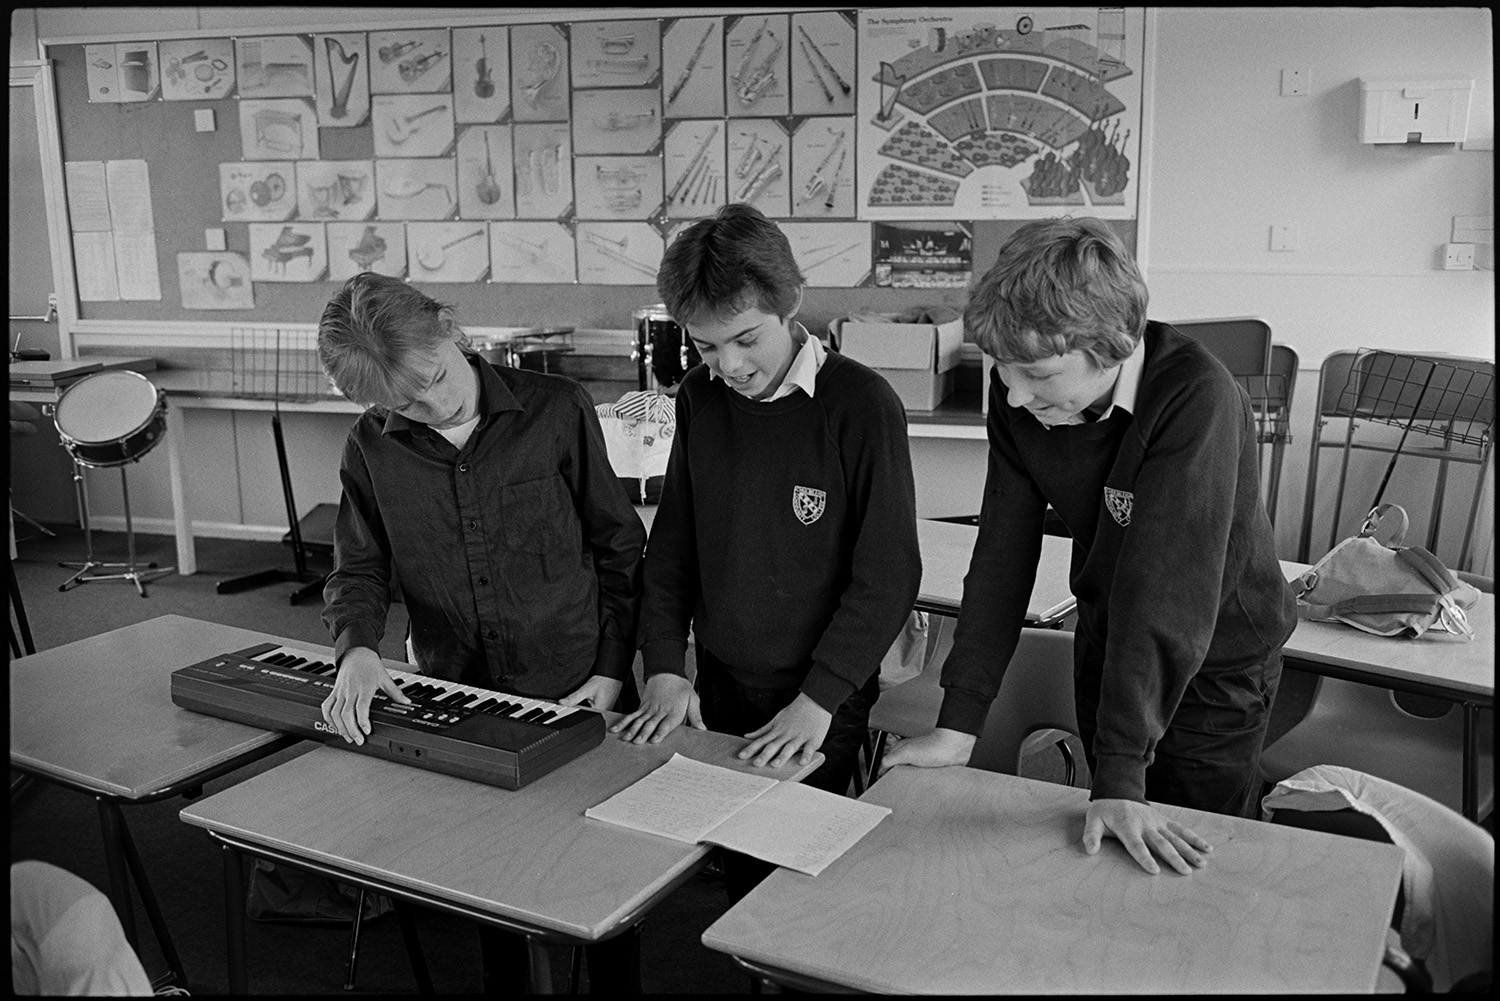 Classroom with pupils acting out short play with music. 
[Three boys reading a short play and playing a keyboard in a classroom at Chulmleigh Community College. Posters with images of musical instruments are displayed on the wall in the background.]